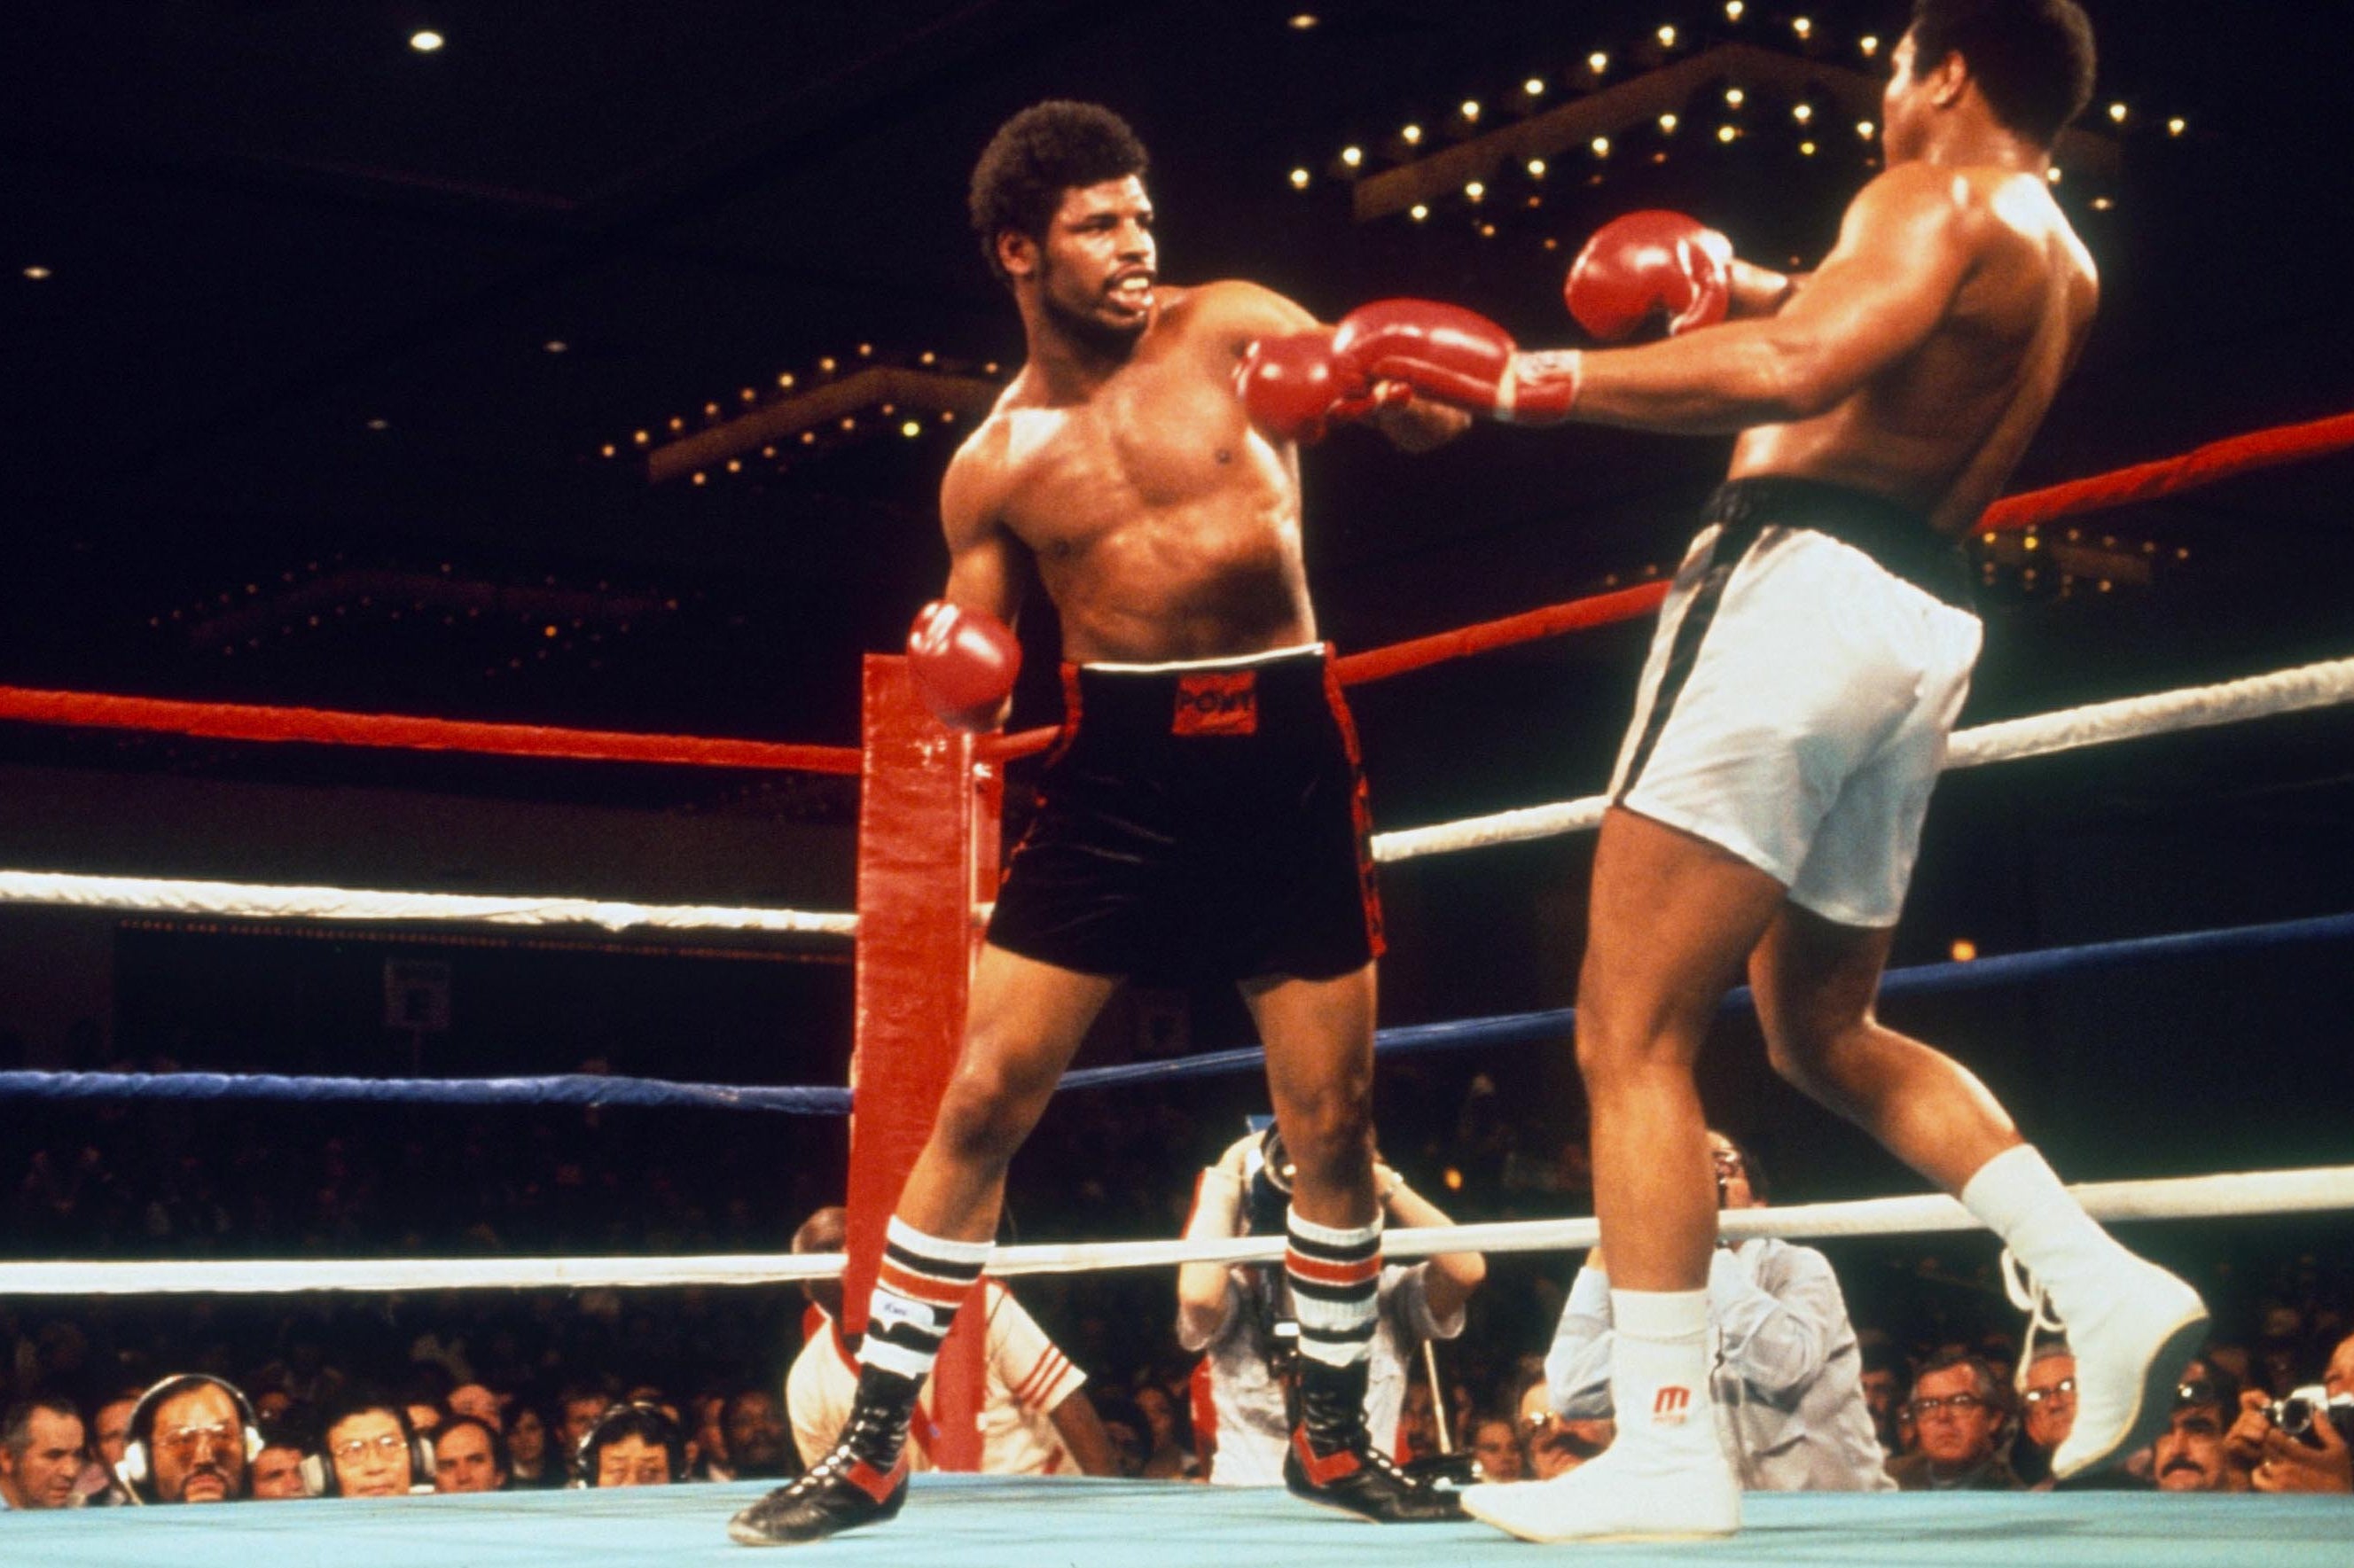 In the ring: Spinks takes on Ali in 1978